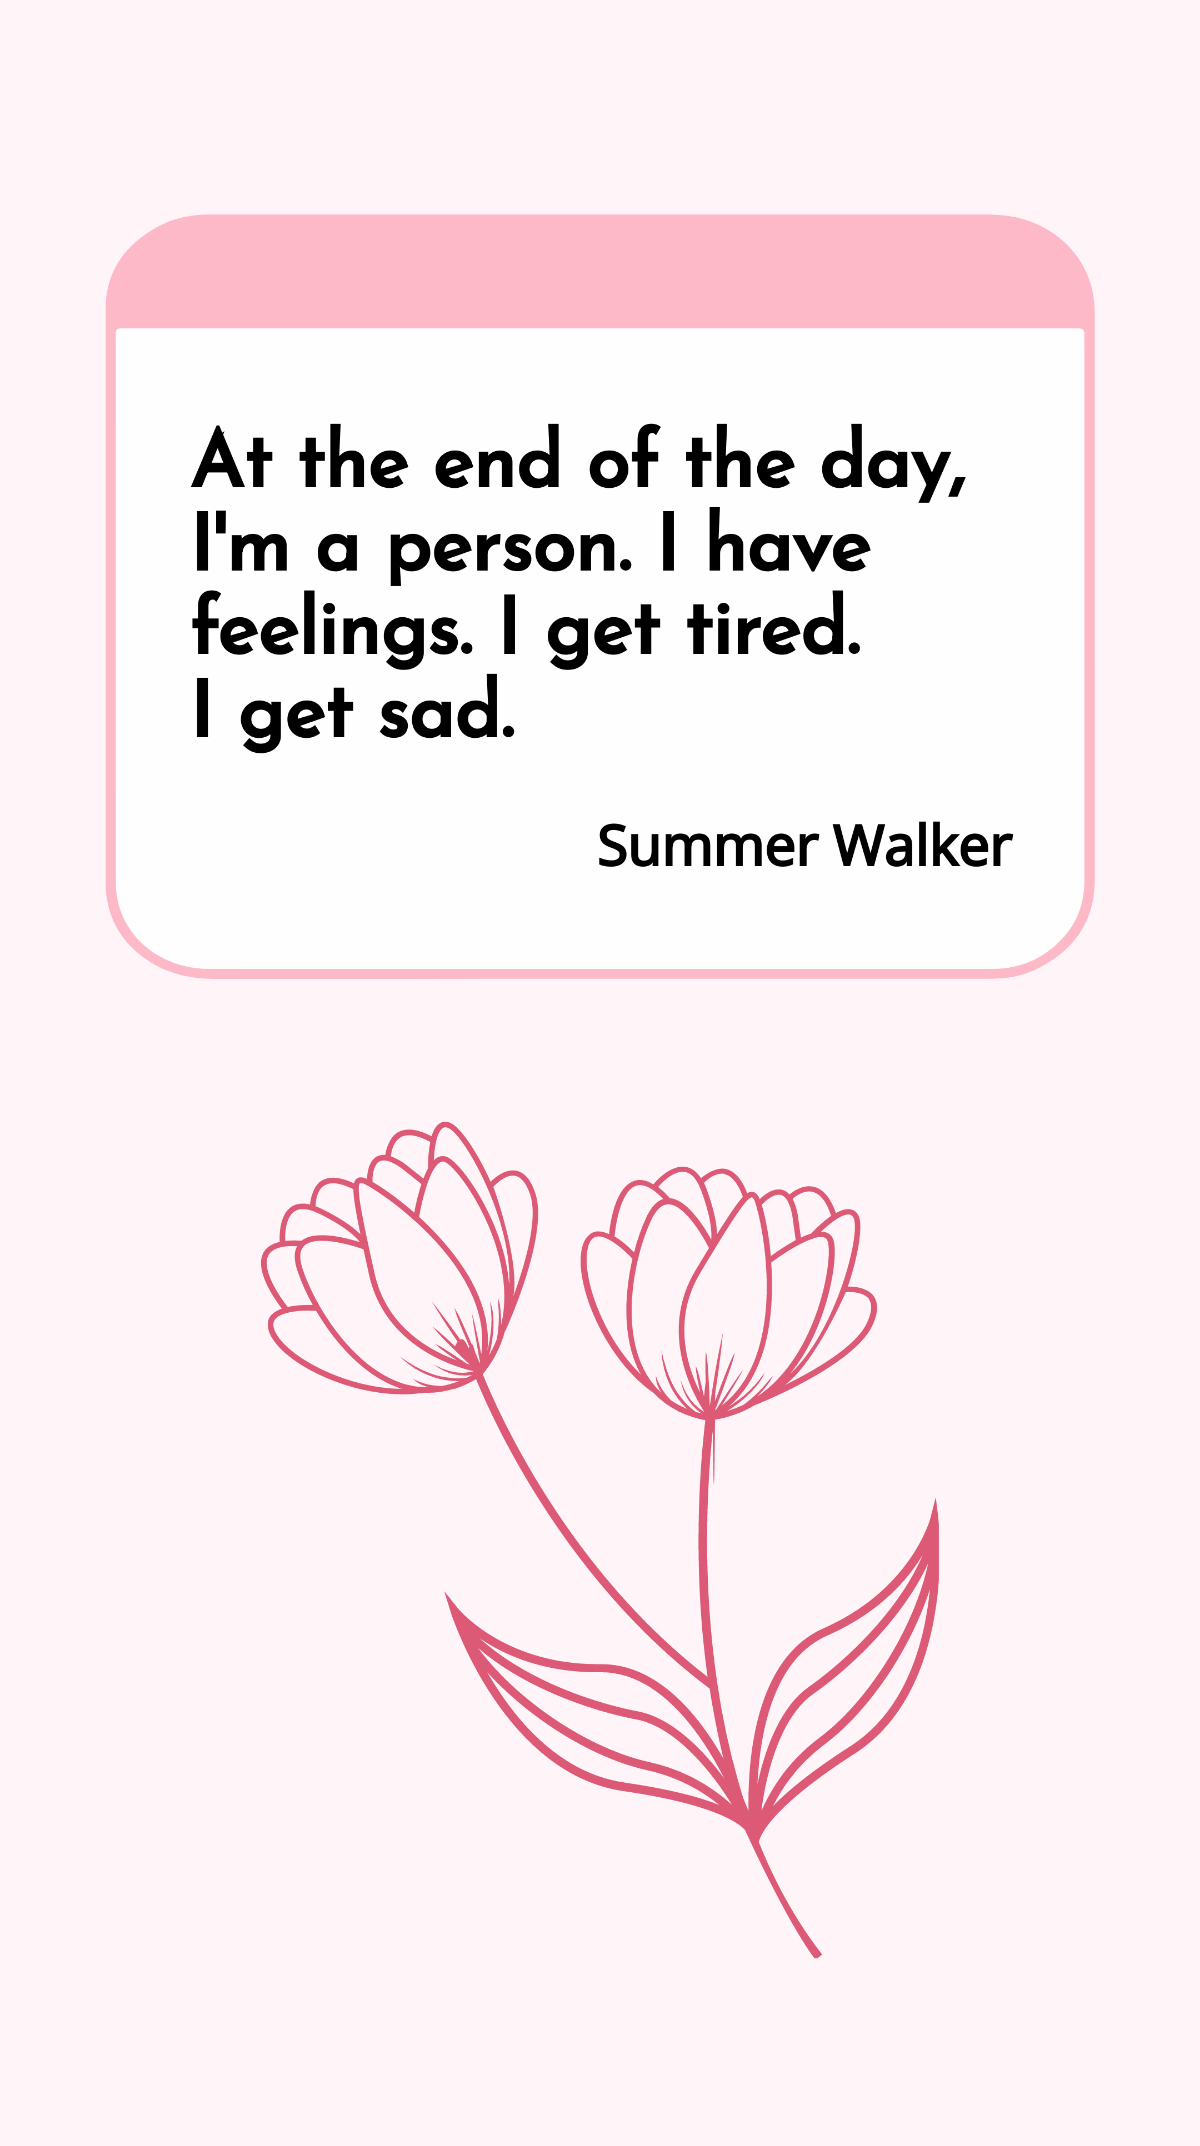 Summer Walker - At the end of the day, I'm a person. I have feelings. I get tired. I get sad. Template